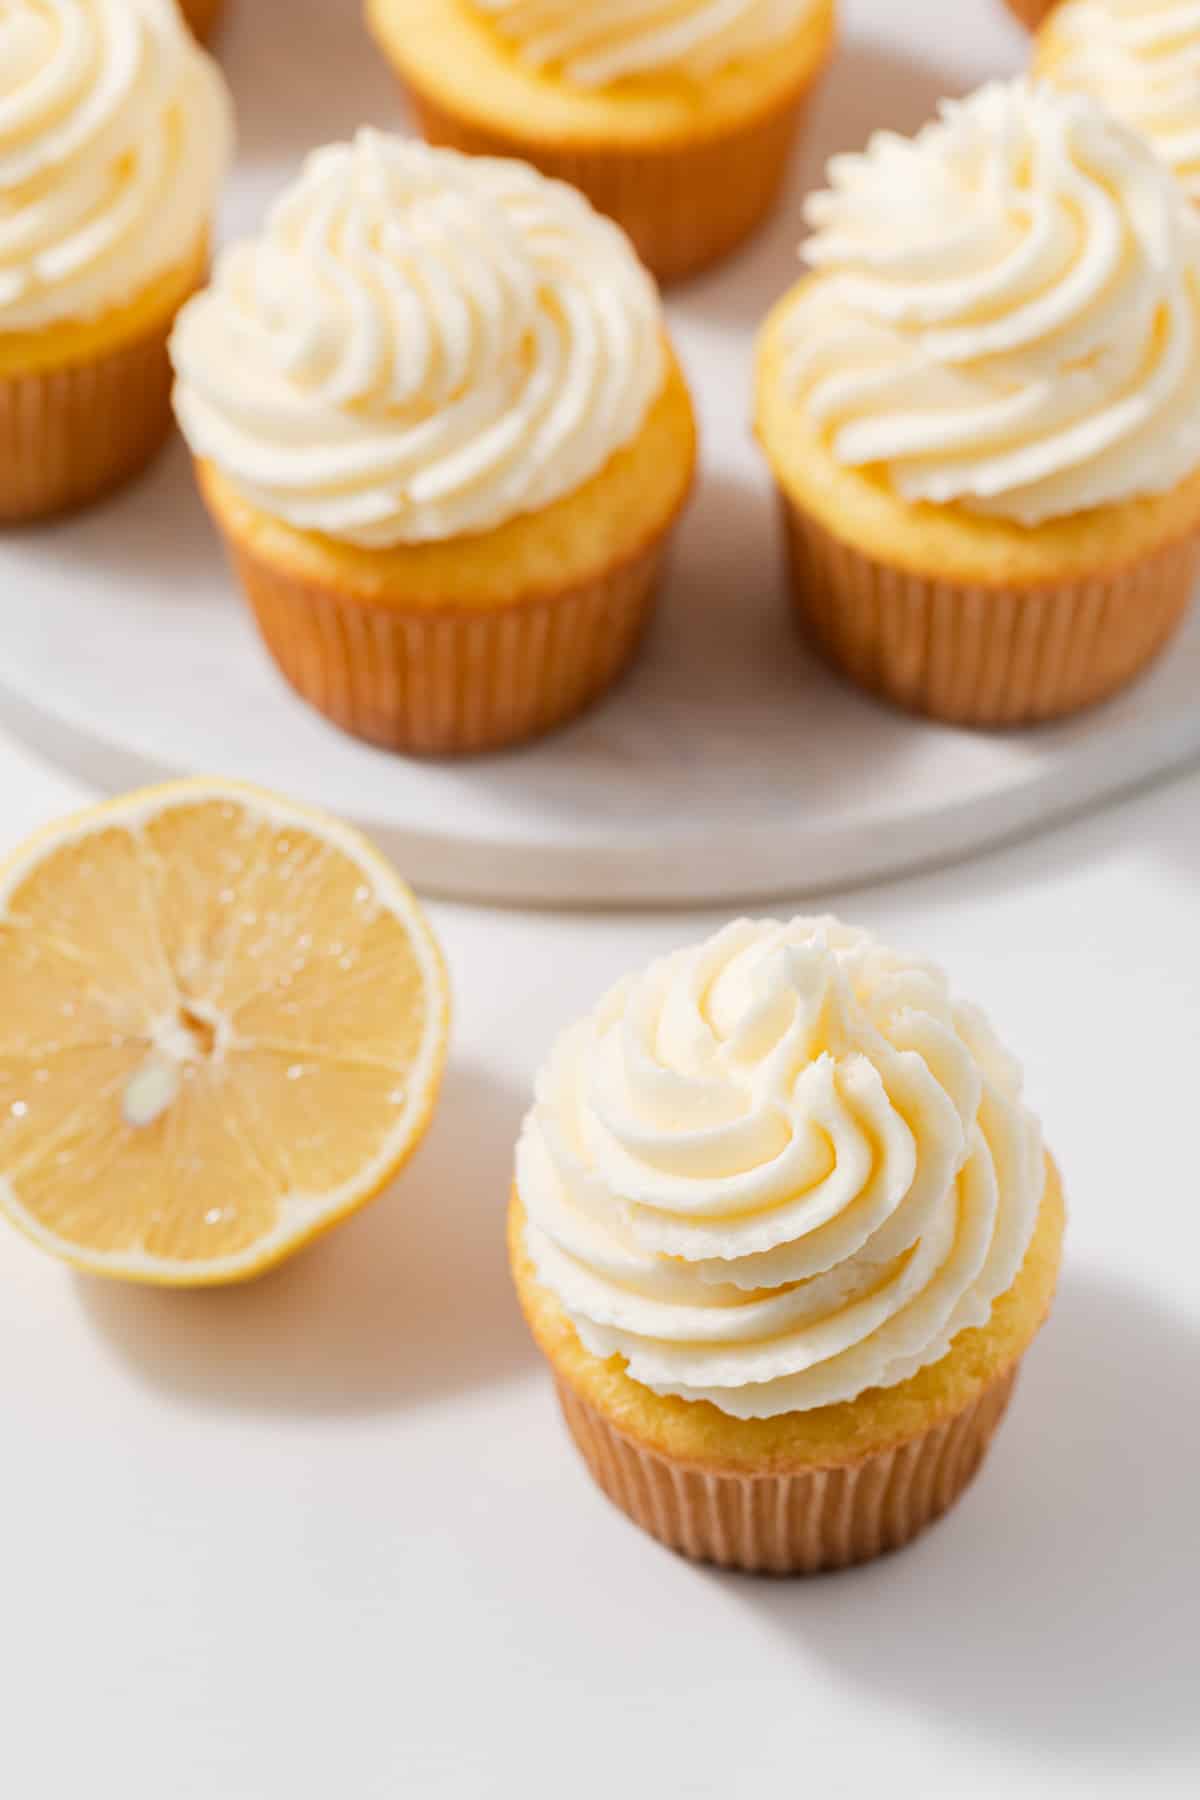 Angled view of cupcakes topped with lemon buttercream frosting.